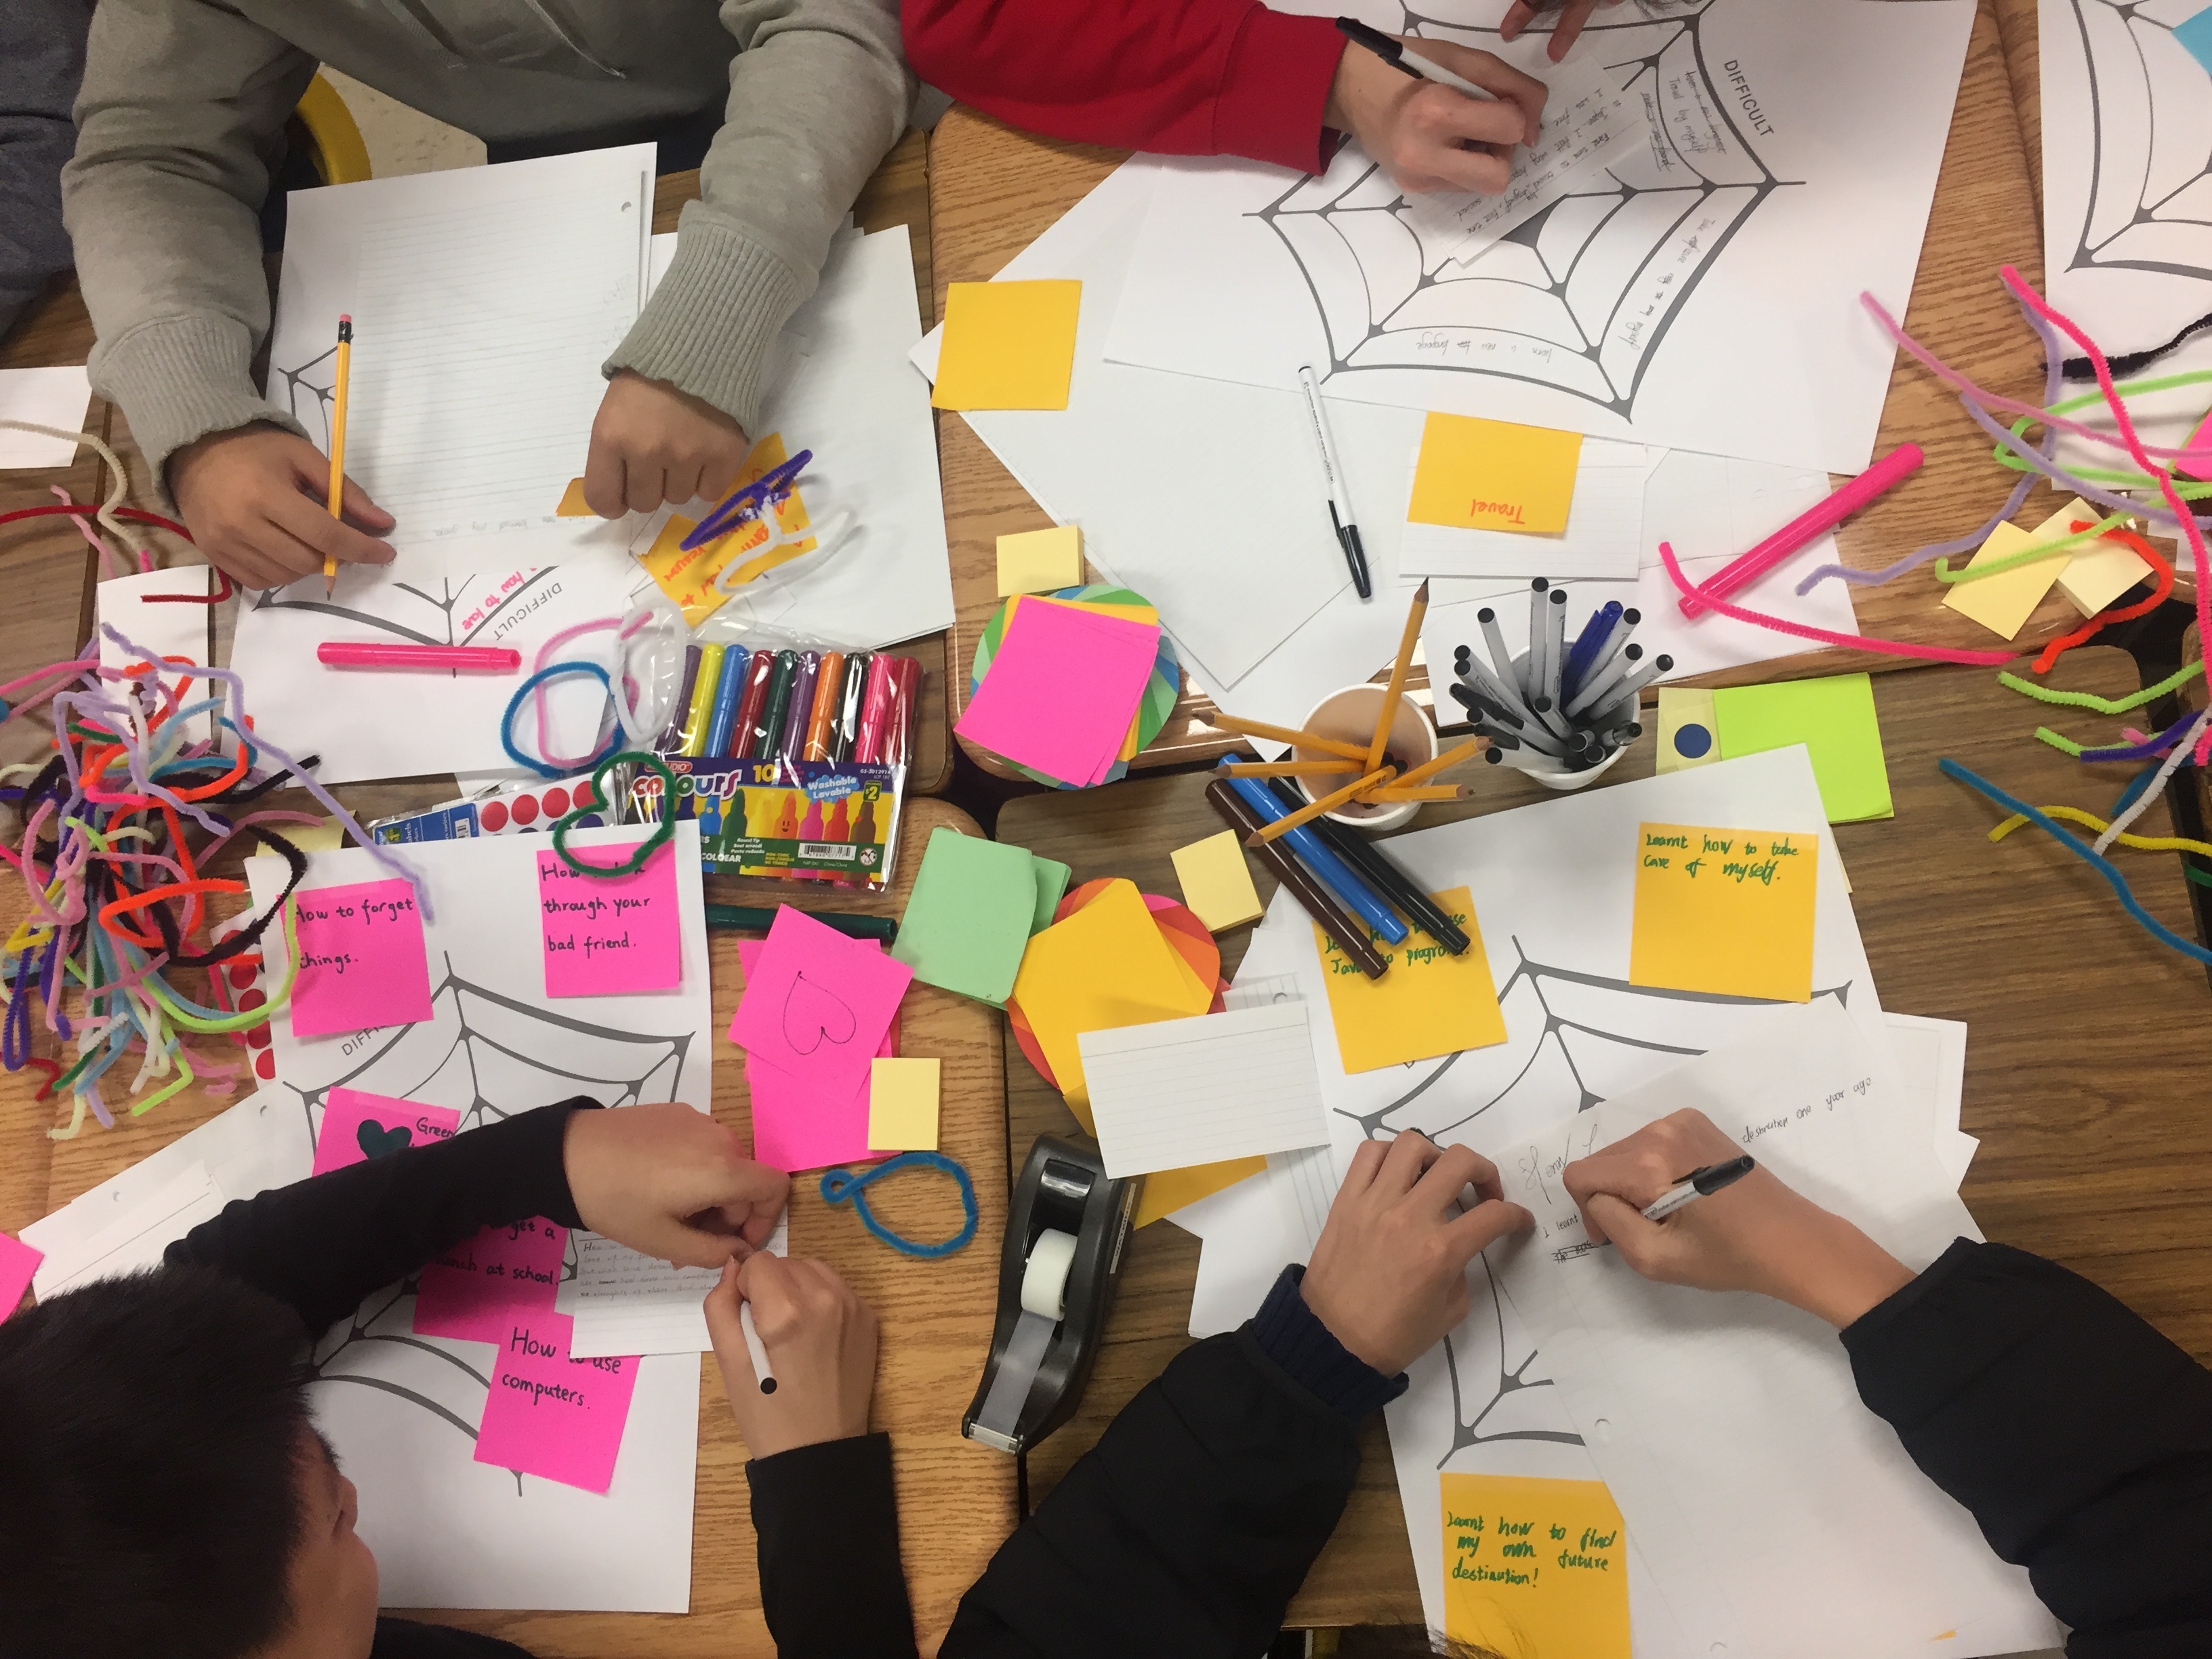 A photo looking down onto a desktop filled with paper, colourful sticky notes, colourful stickers, pencils, pipe cleaners, and the arms and hands of several participants who are writing or playing with the materials.